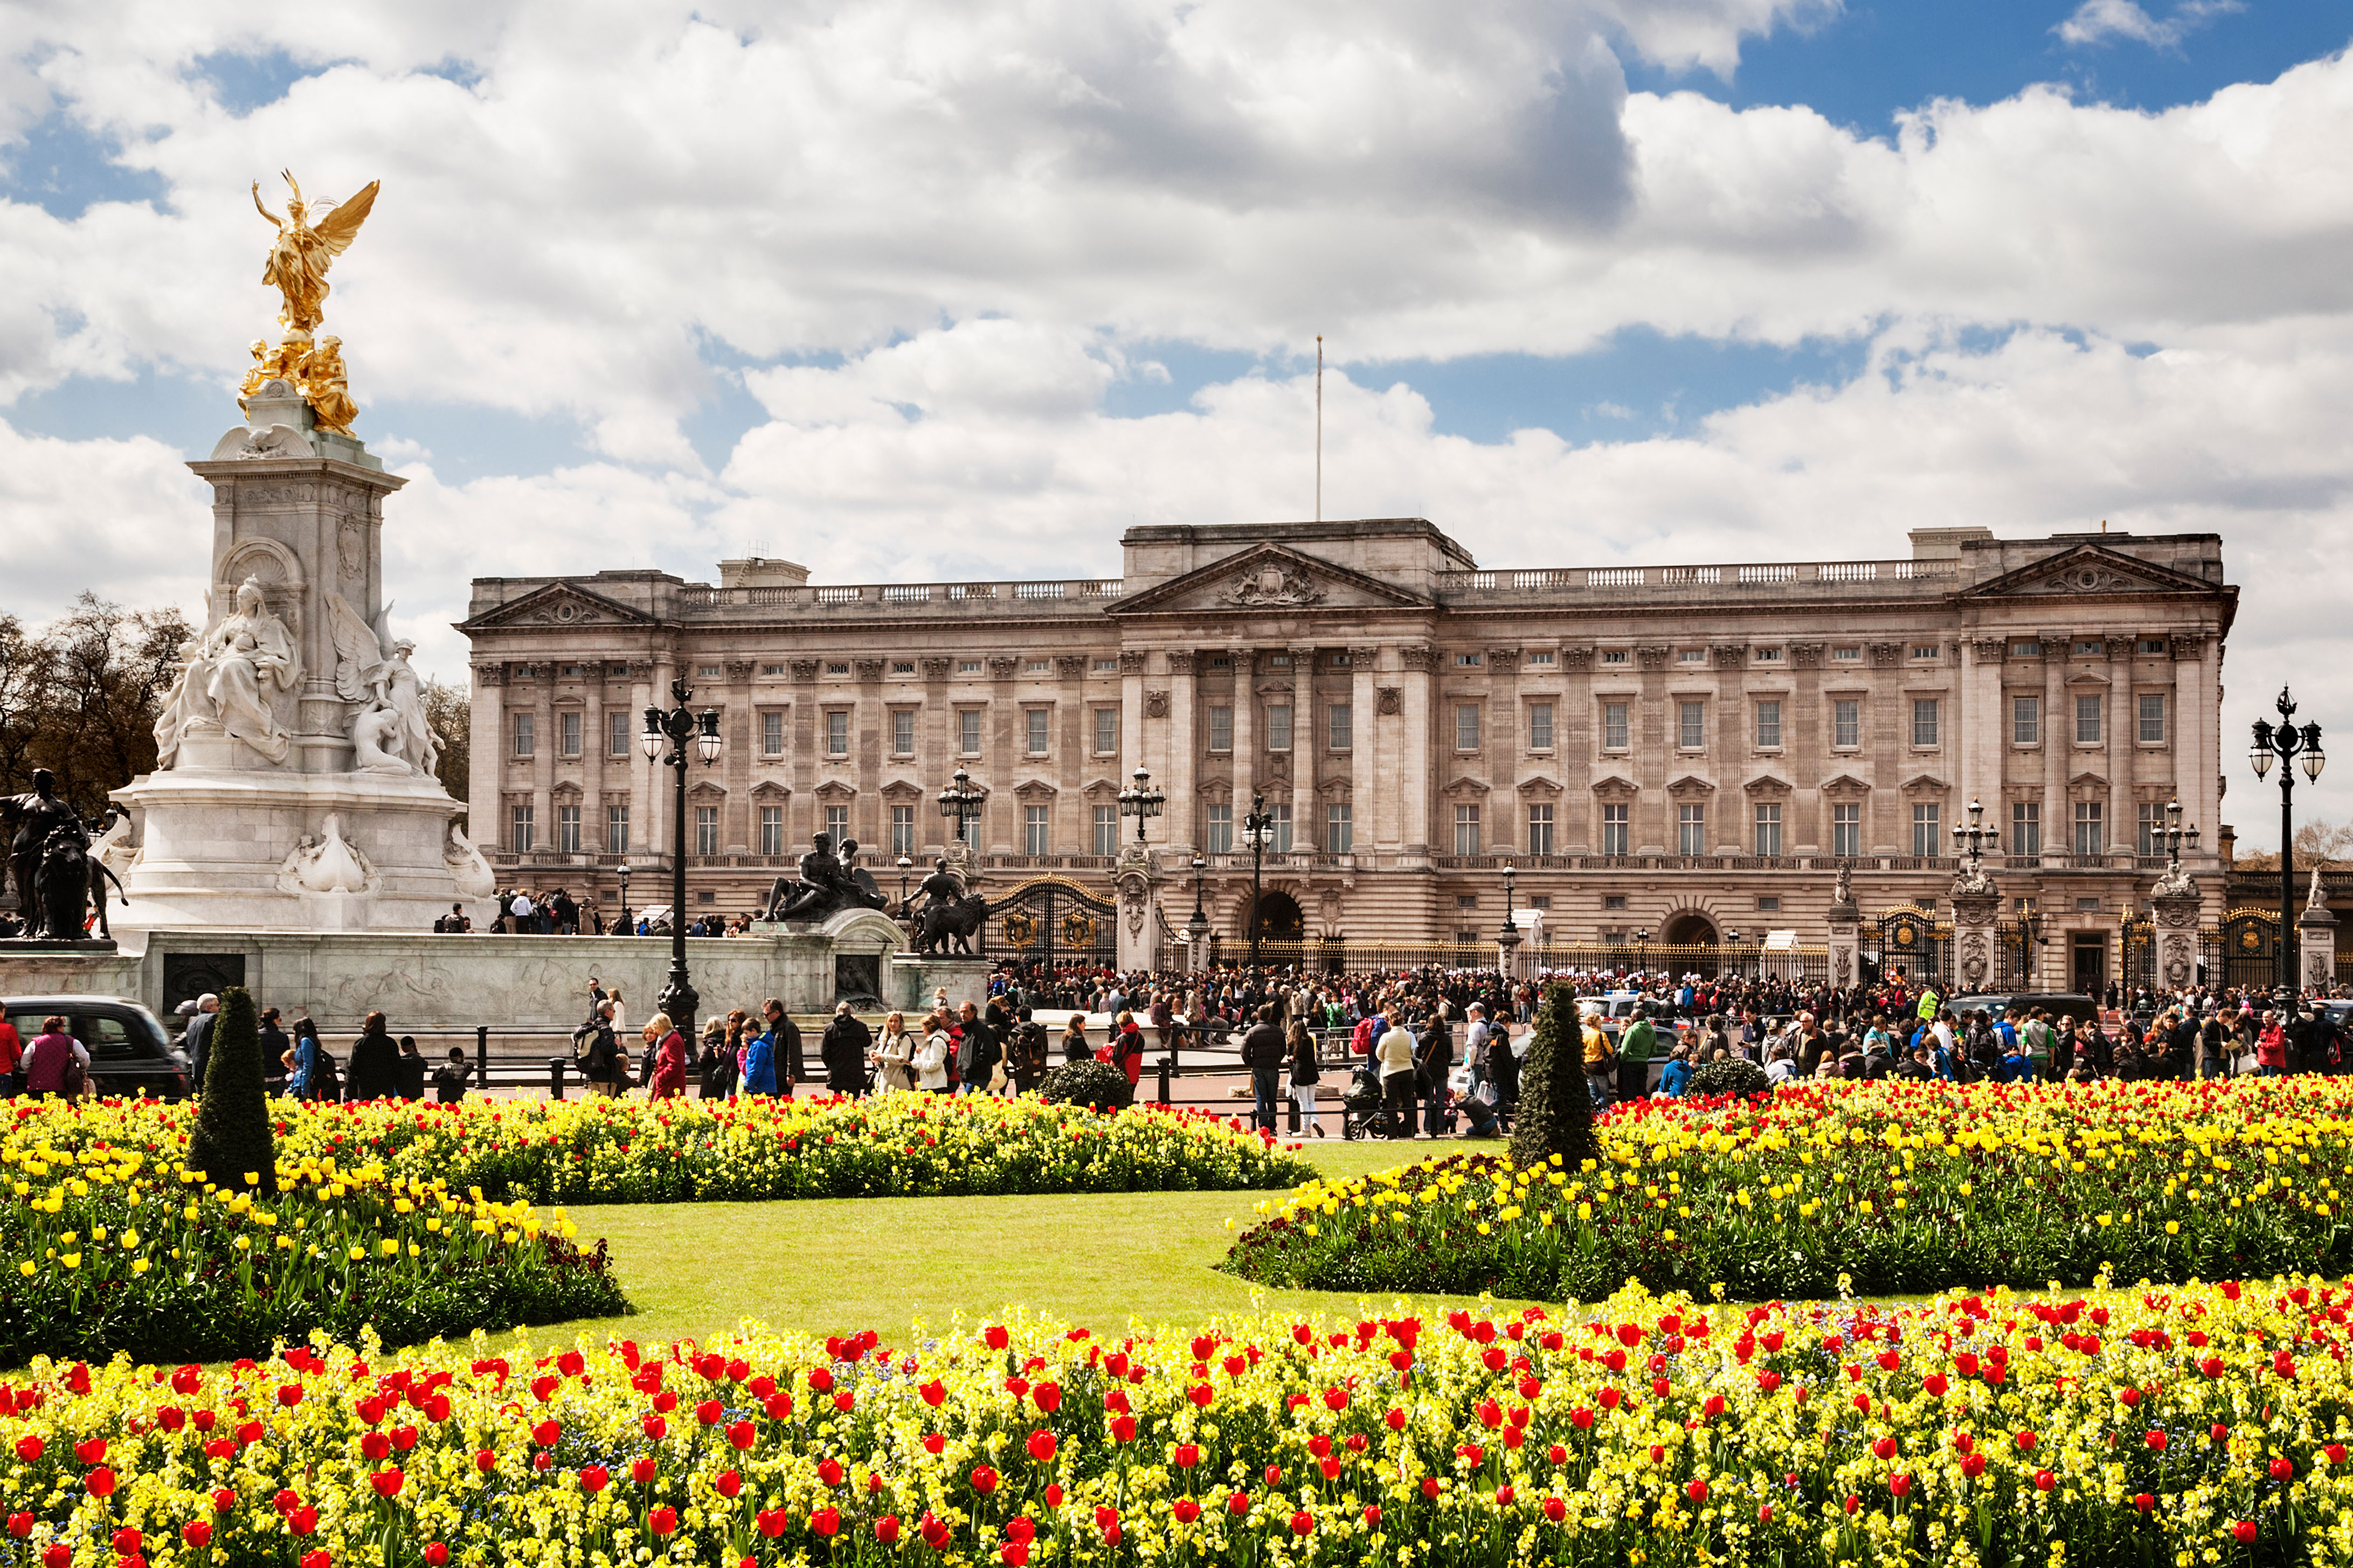 HQ Buckingham Palace Wallpapers | File 3089.91Kb